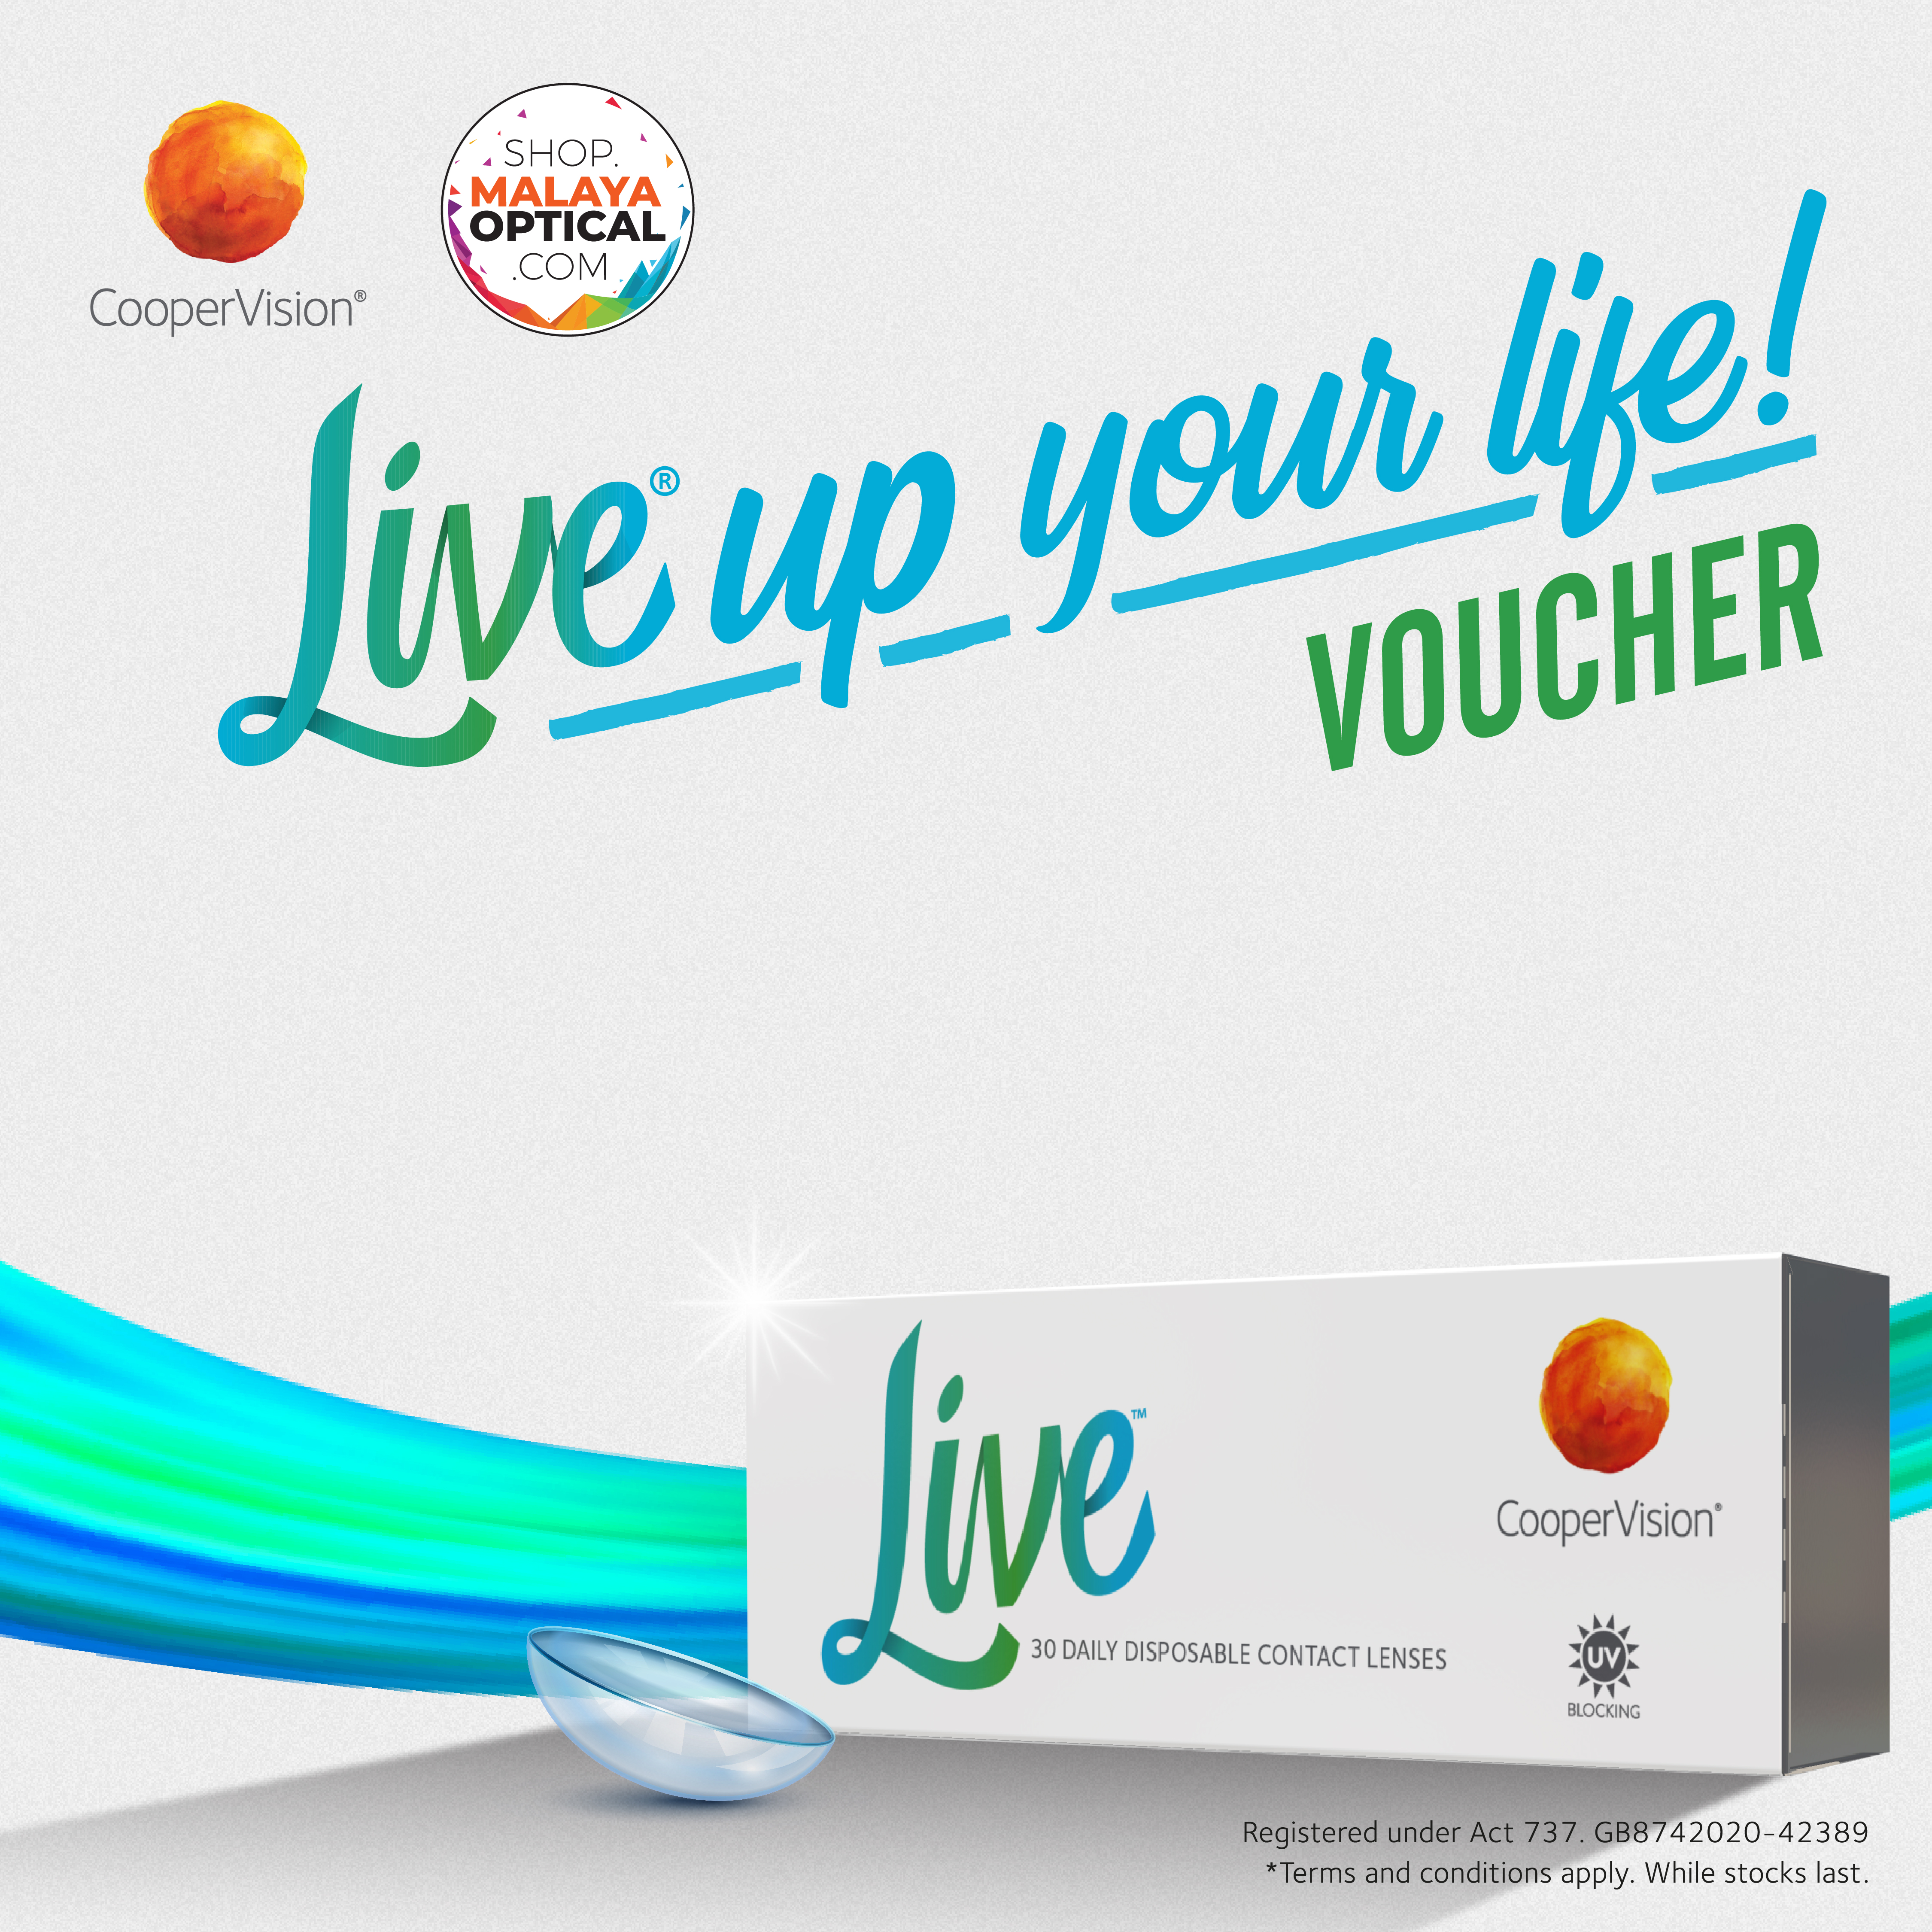 Time To Live Up Your Life With CooperVision! 